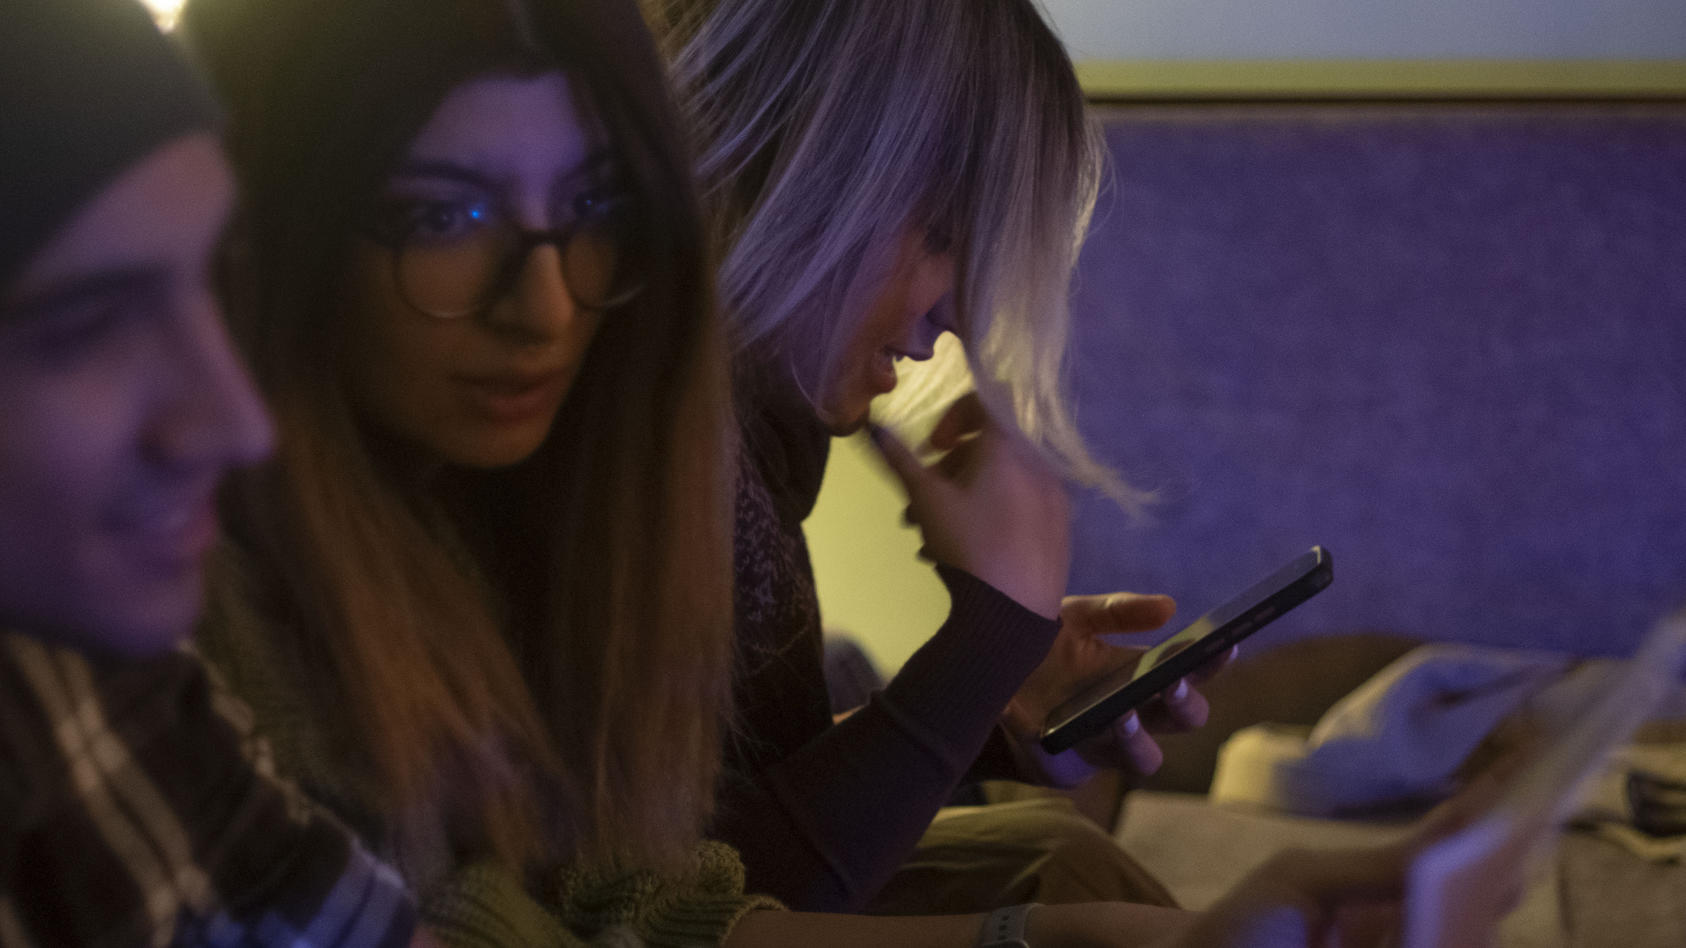 An Iranian young woman uses her smartphone to check her social media pages while waiting for an underground music performance at a cafe in downtown Tehran at night, January 18, 2023. Tehran seems more calm after months of unrest, with youths gatherin